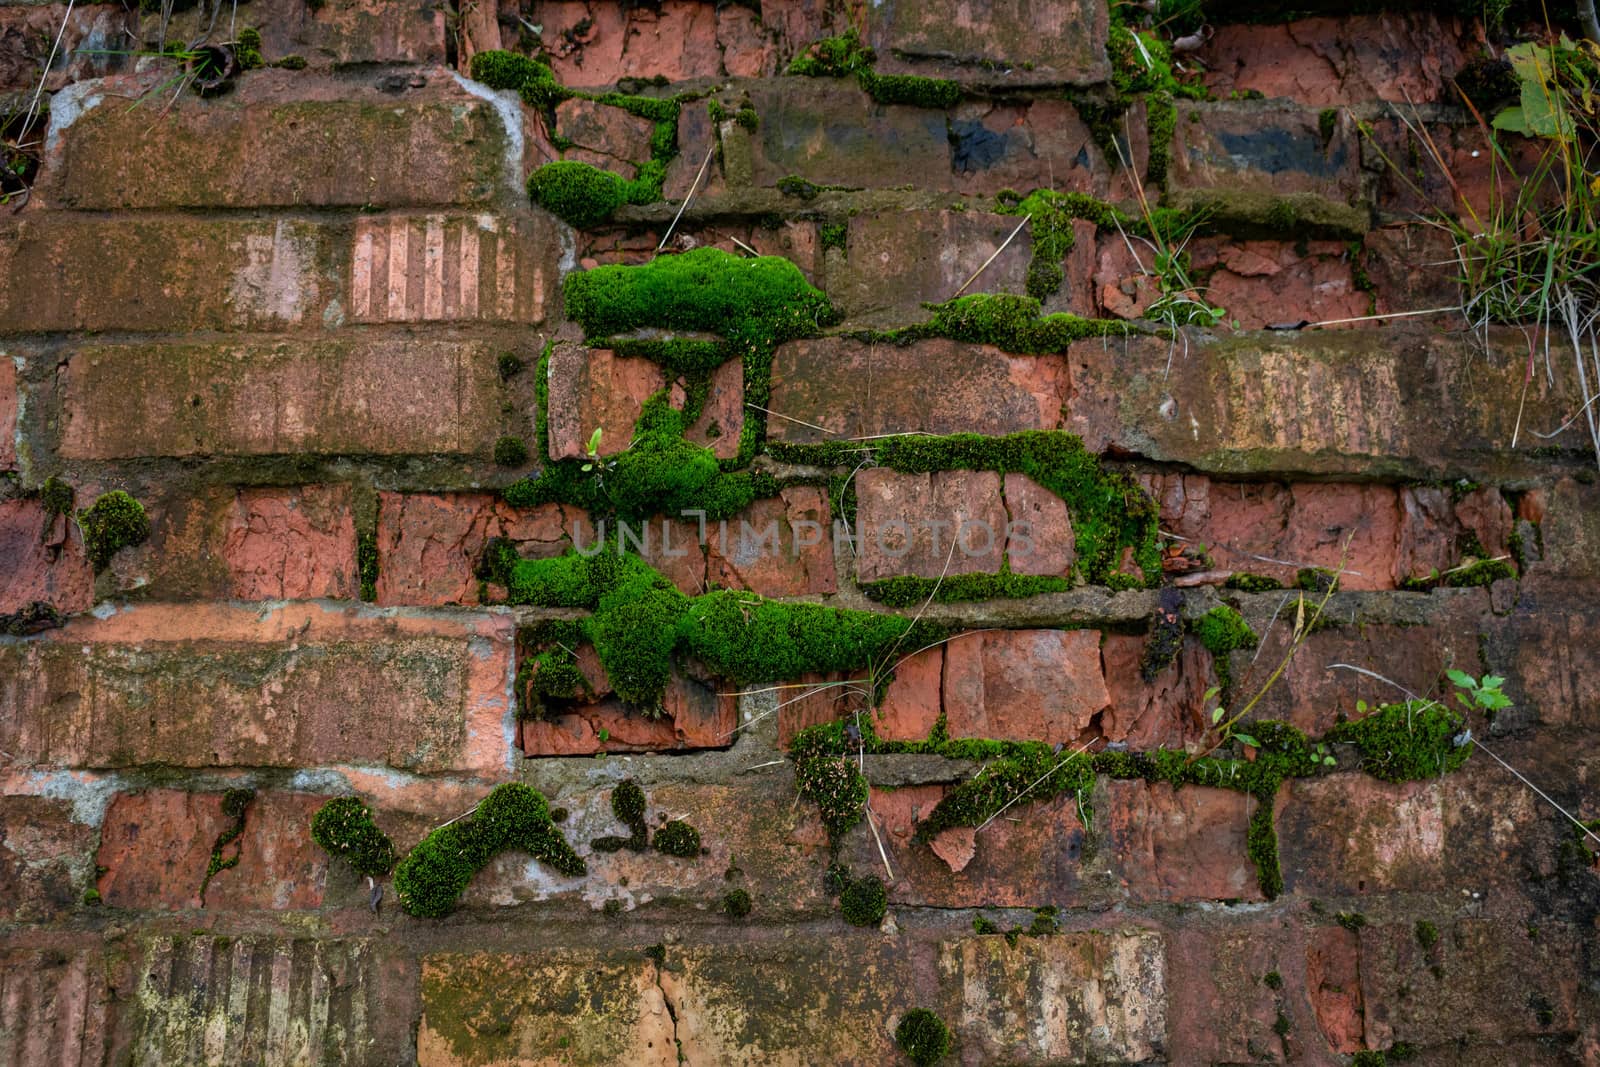 Old ruined brick wall overgrown with moss.